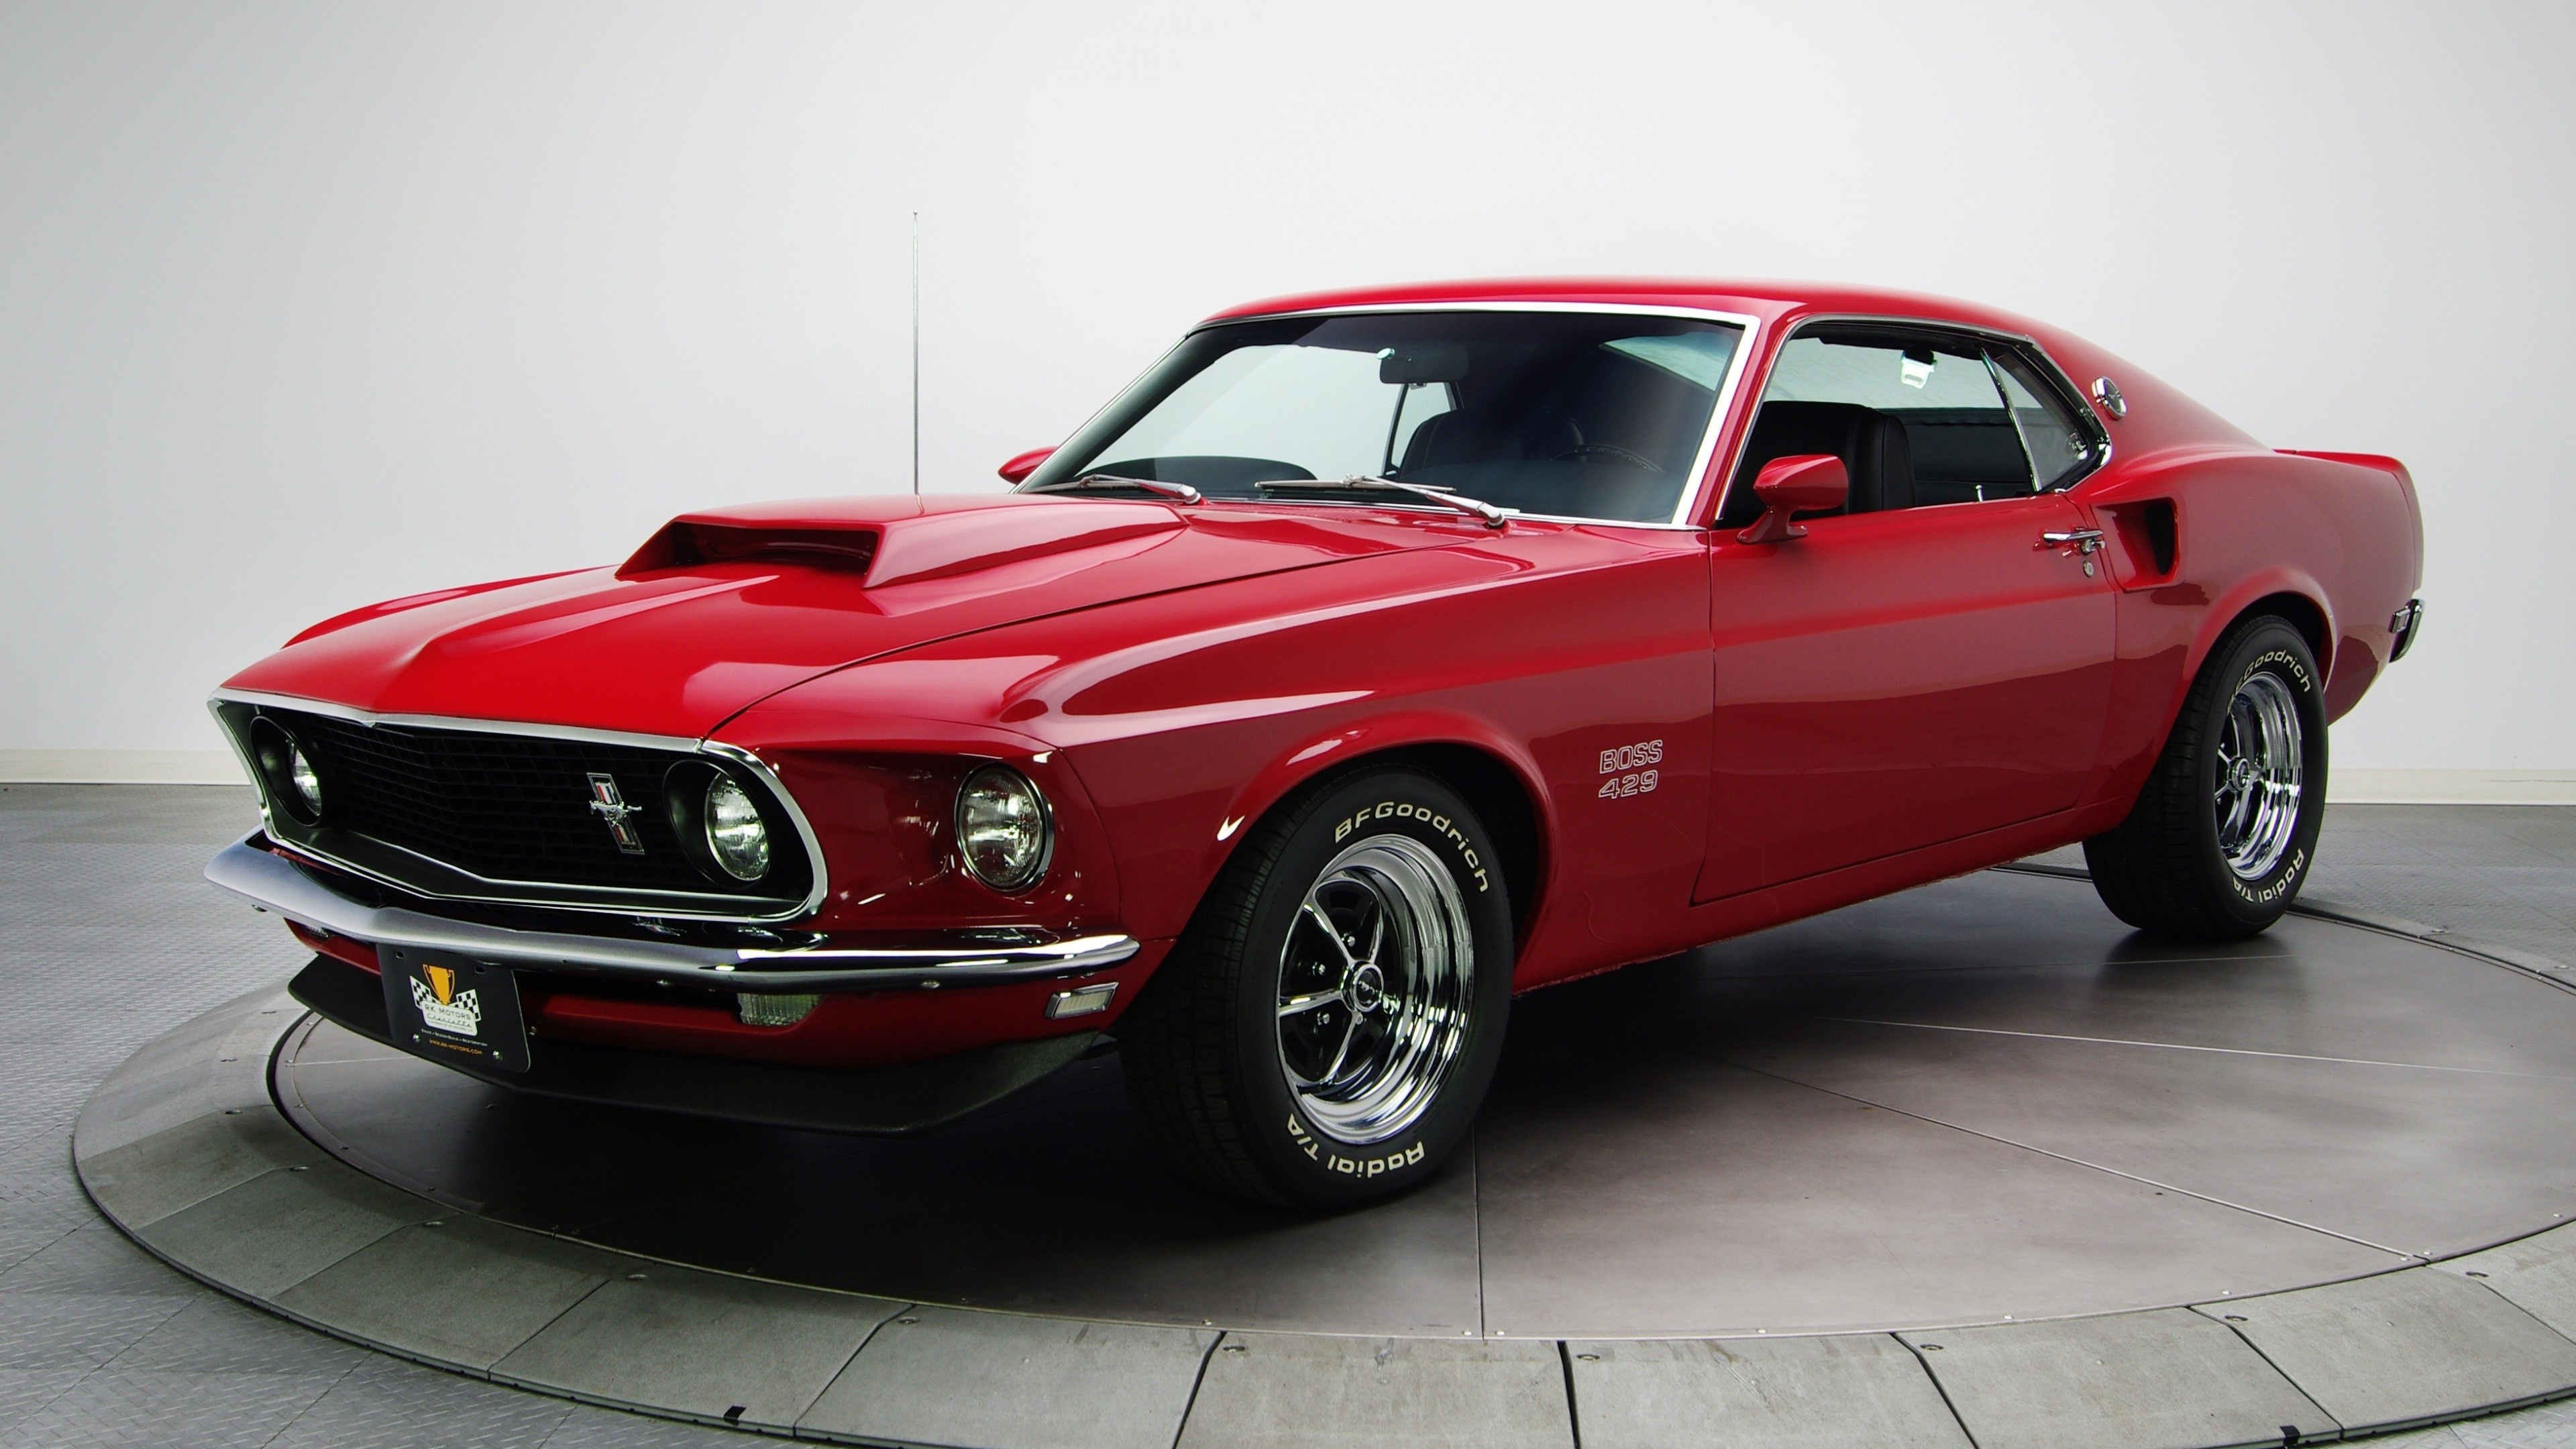 Ford Mustang, Ford Mustang red muscle cars, 3840x2160 4K Desktop